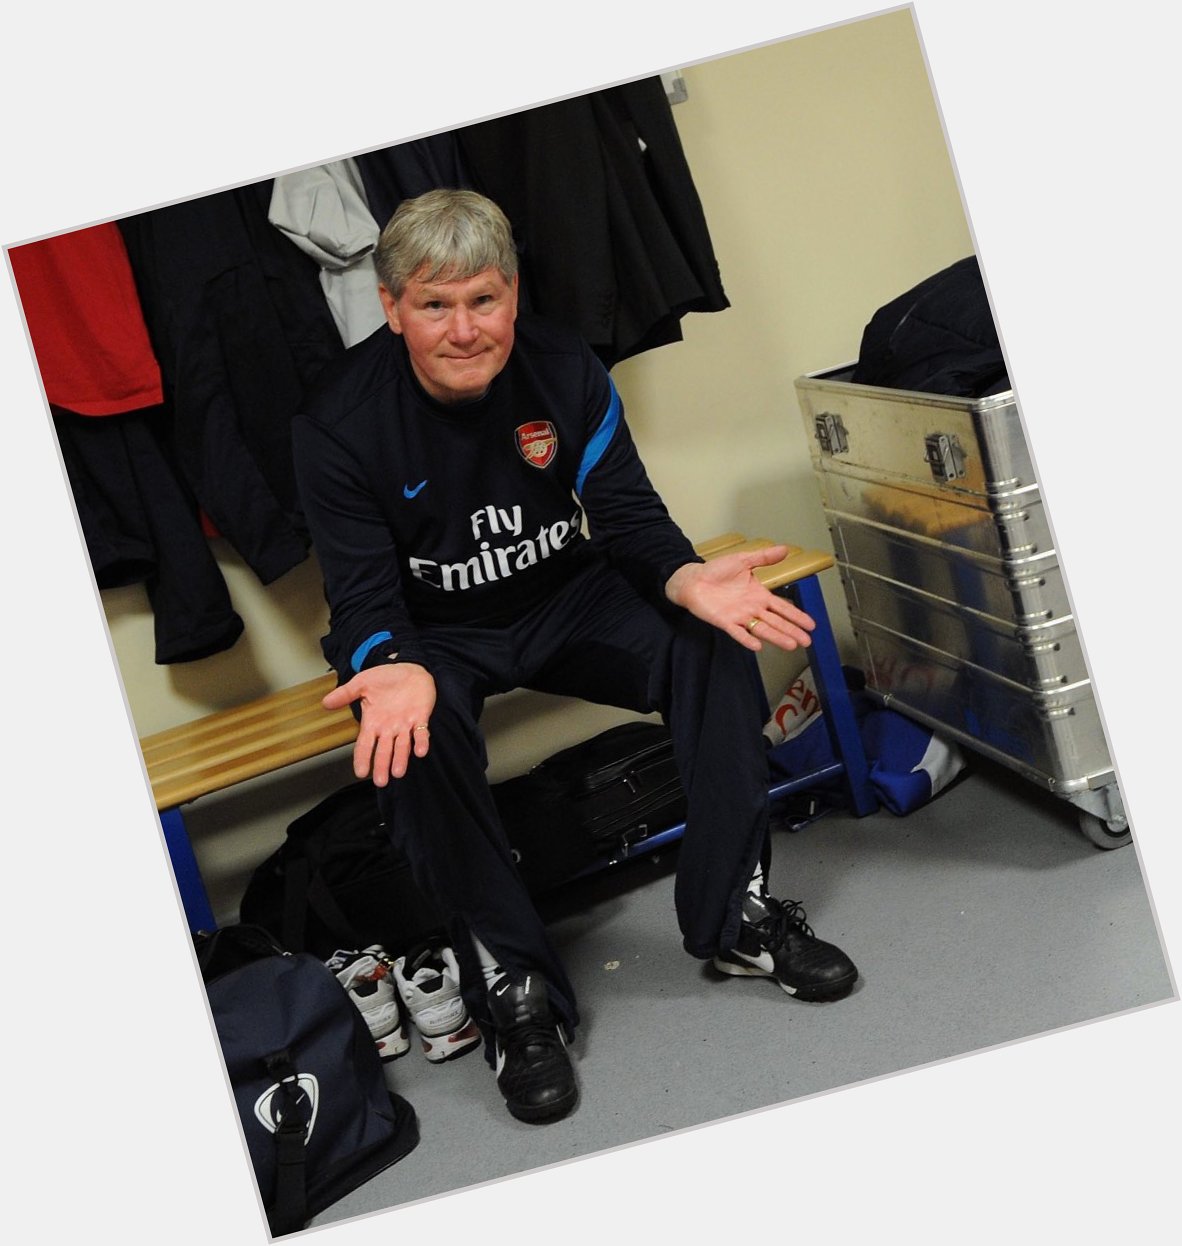 Happy birthday to the man behind the scenes and wengers right hand man for years , pat rice  